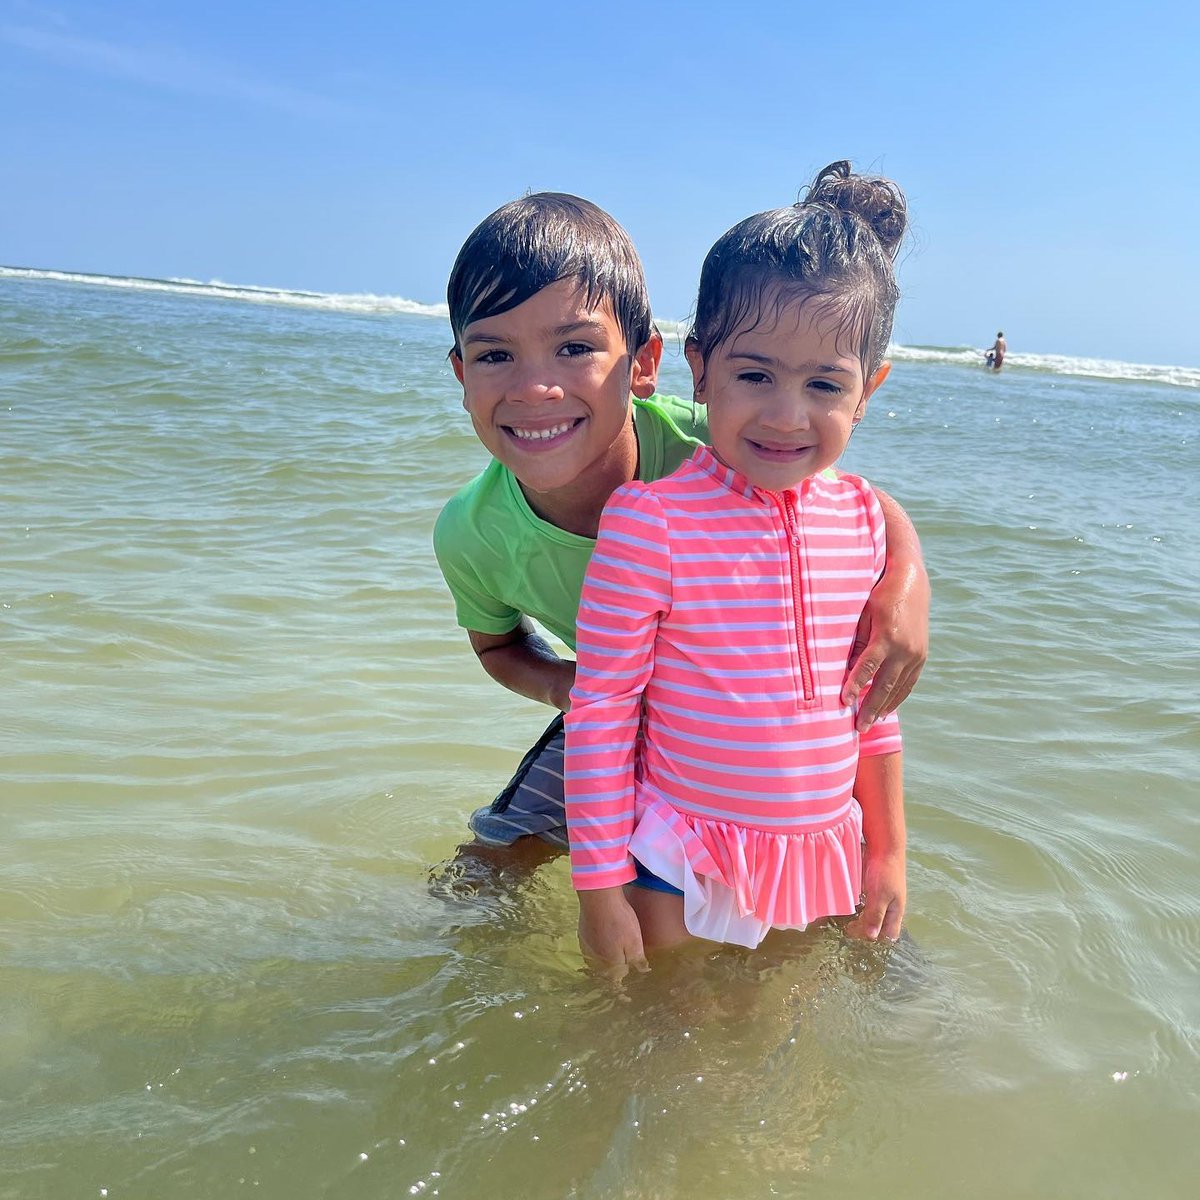 🌞 Sunshine and 🐚 seashells!  Florida's Historic Coast beaches are perfect for families. Gentle waves, calm waters, and plenty of space to build sandcastles while making unforgettable memories. 📸 @NiurkaJ27 bit.ly/3ib8p2W